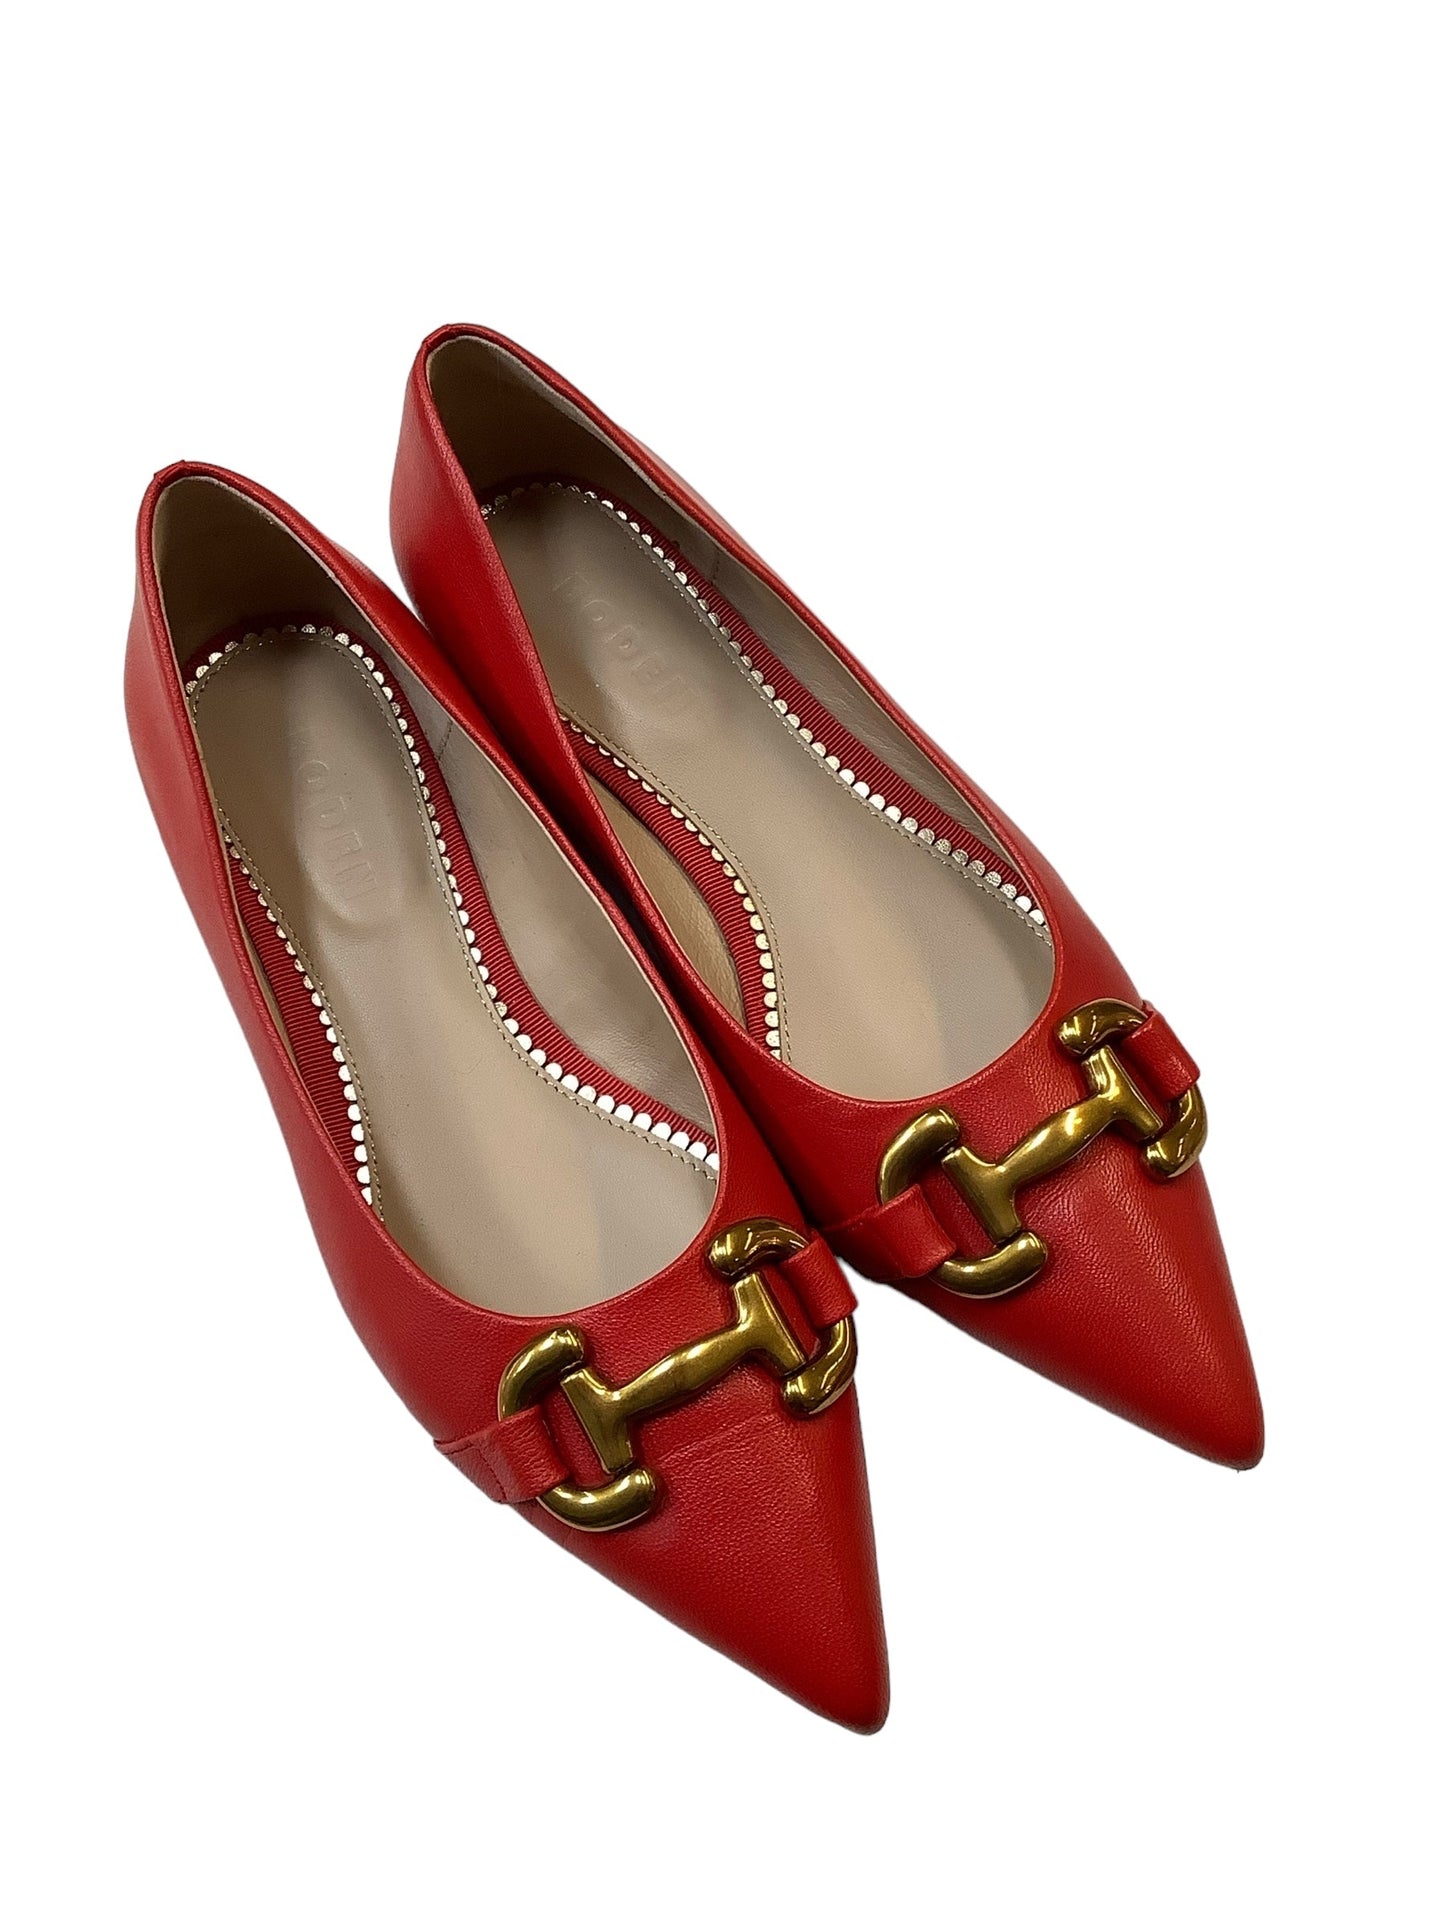 Red Shoes Flats Boden, Size 7